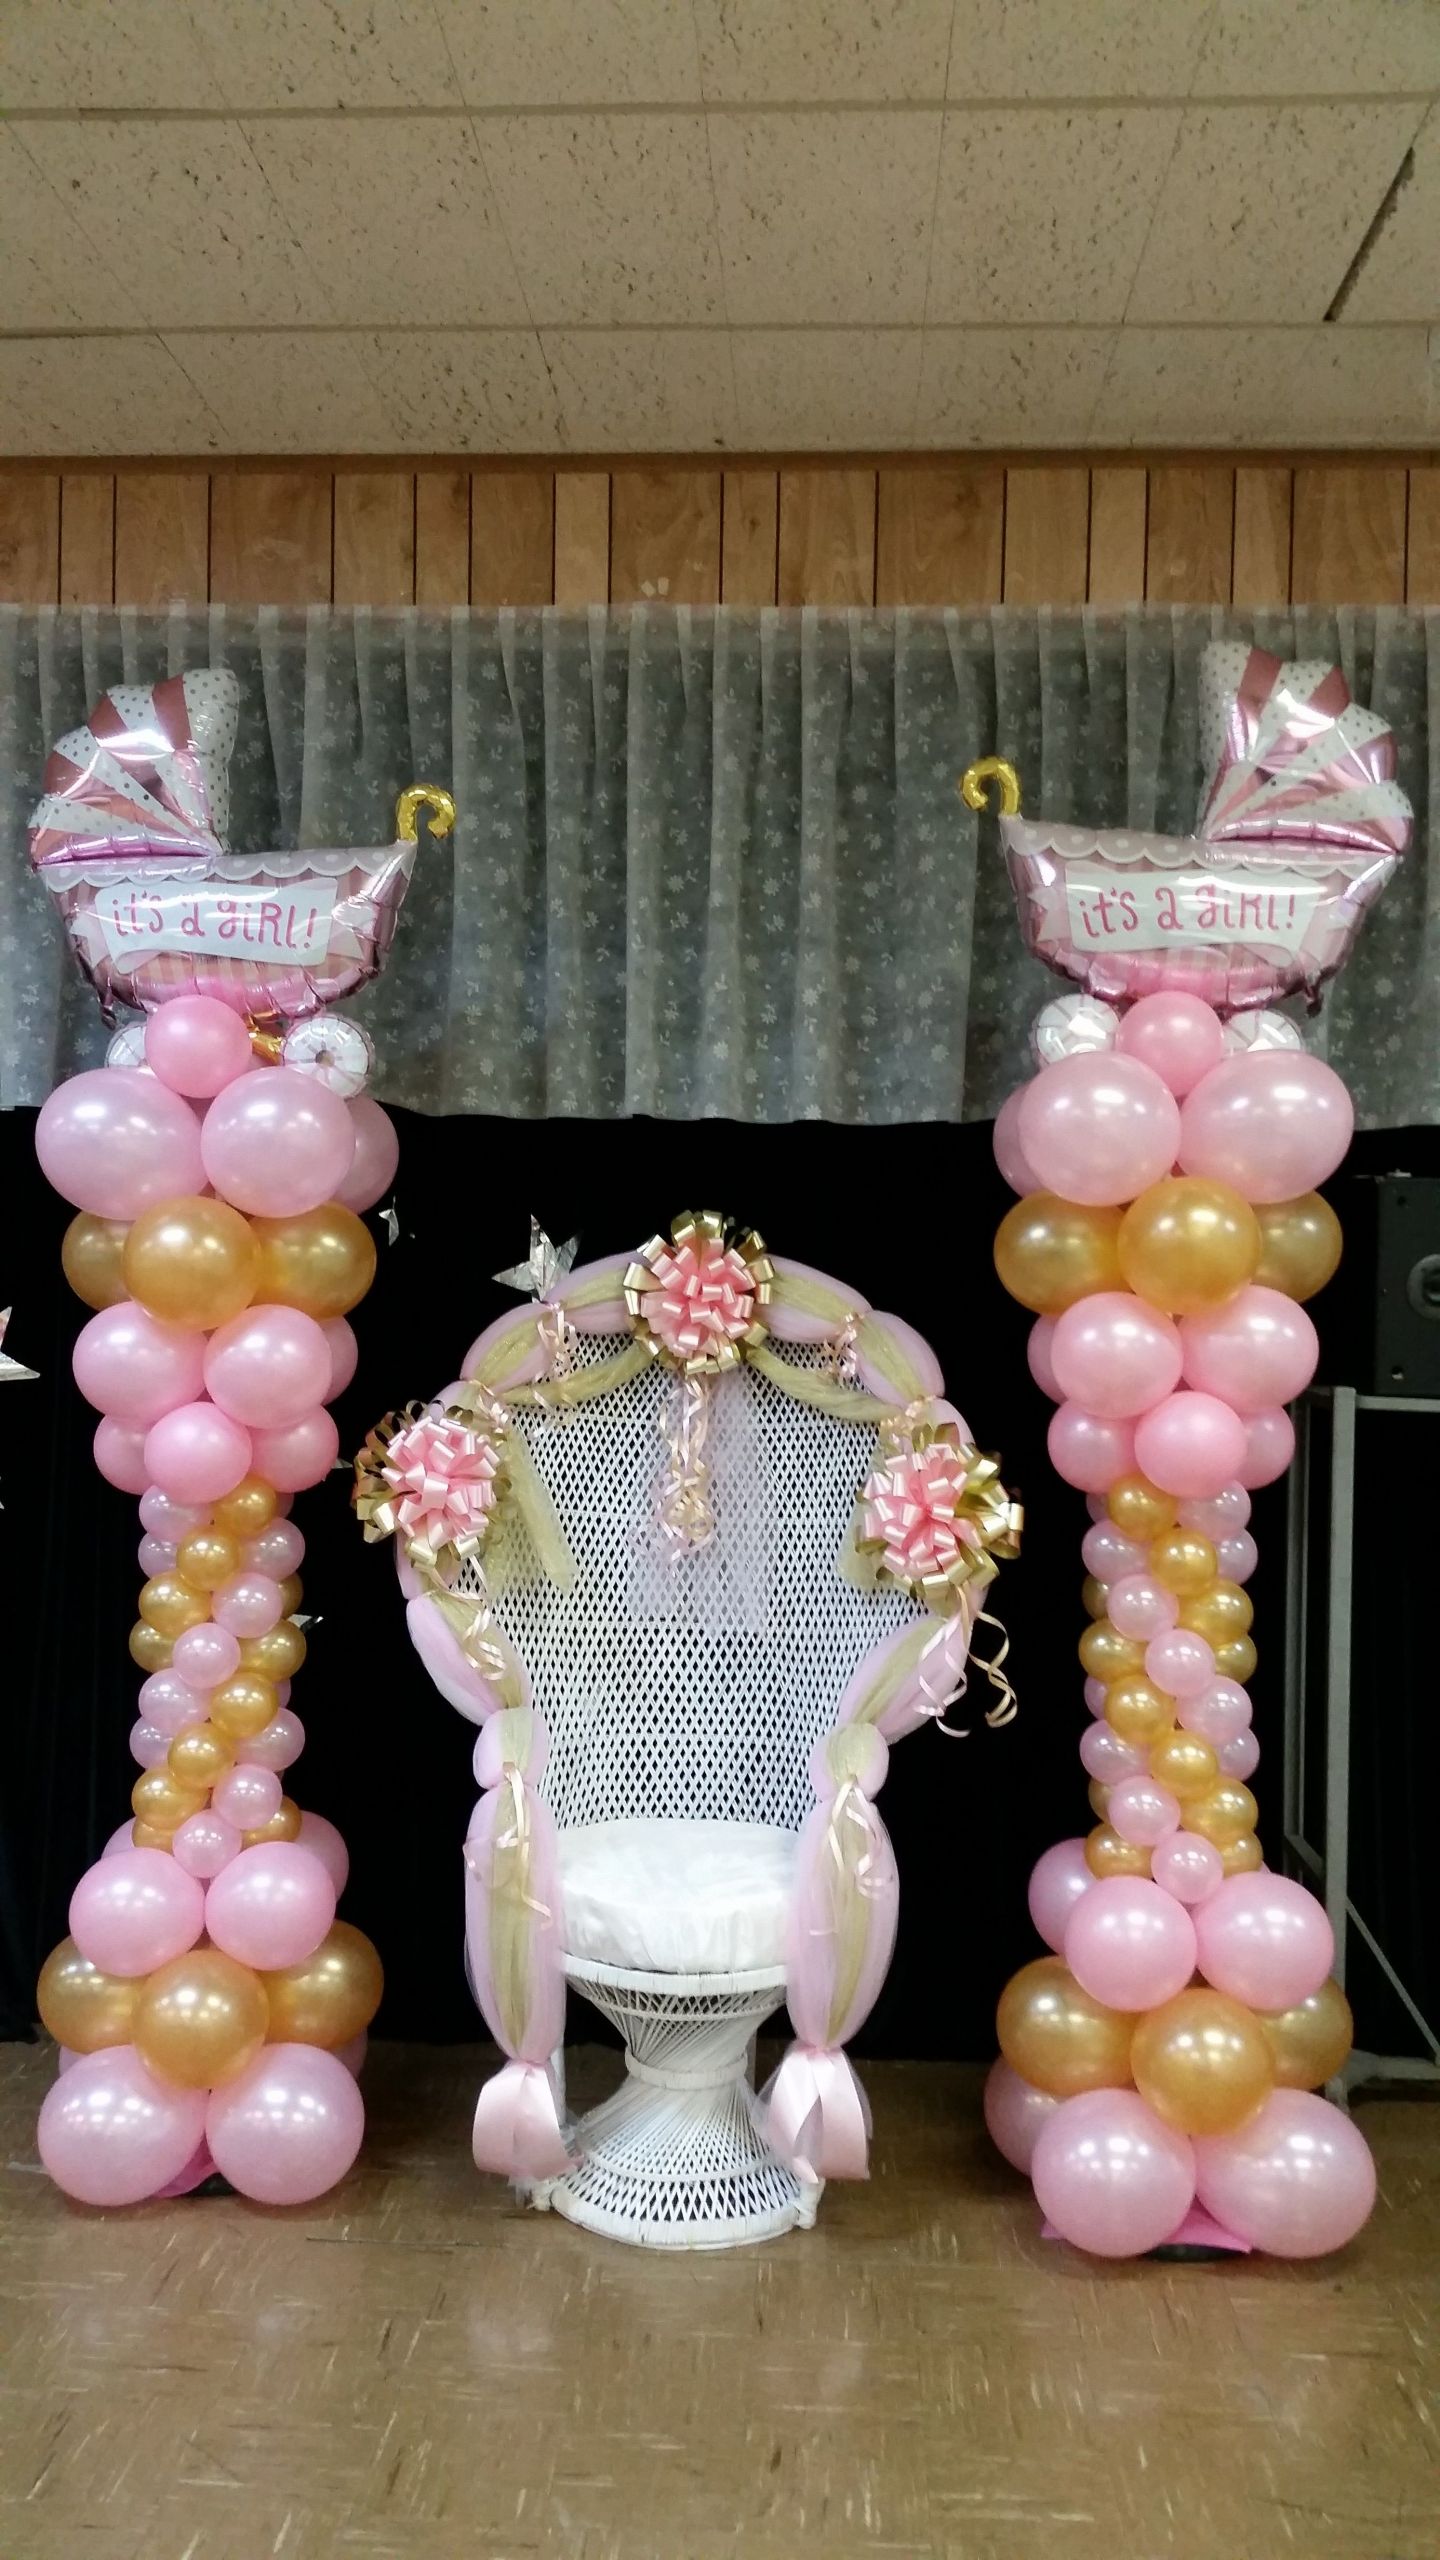 Baby Shower Balloon Decoration Ideas
 Baby shower chair and balloon columns